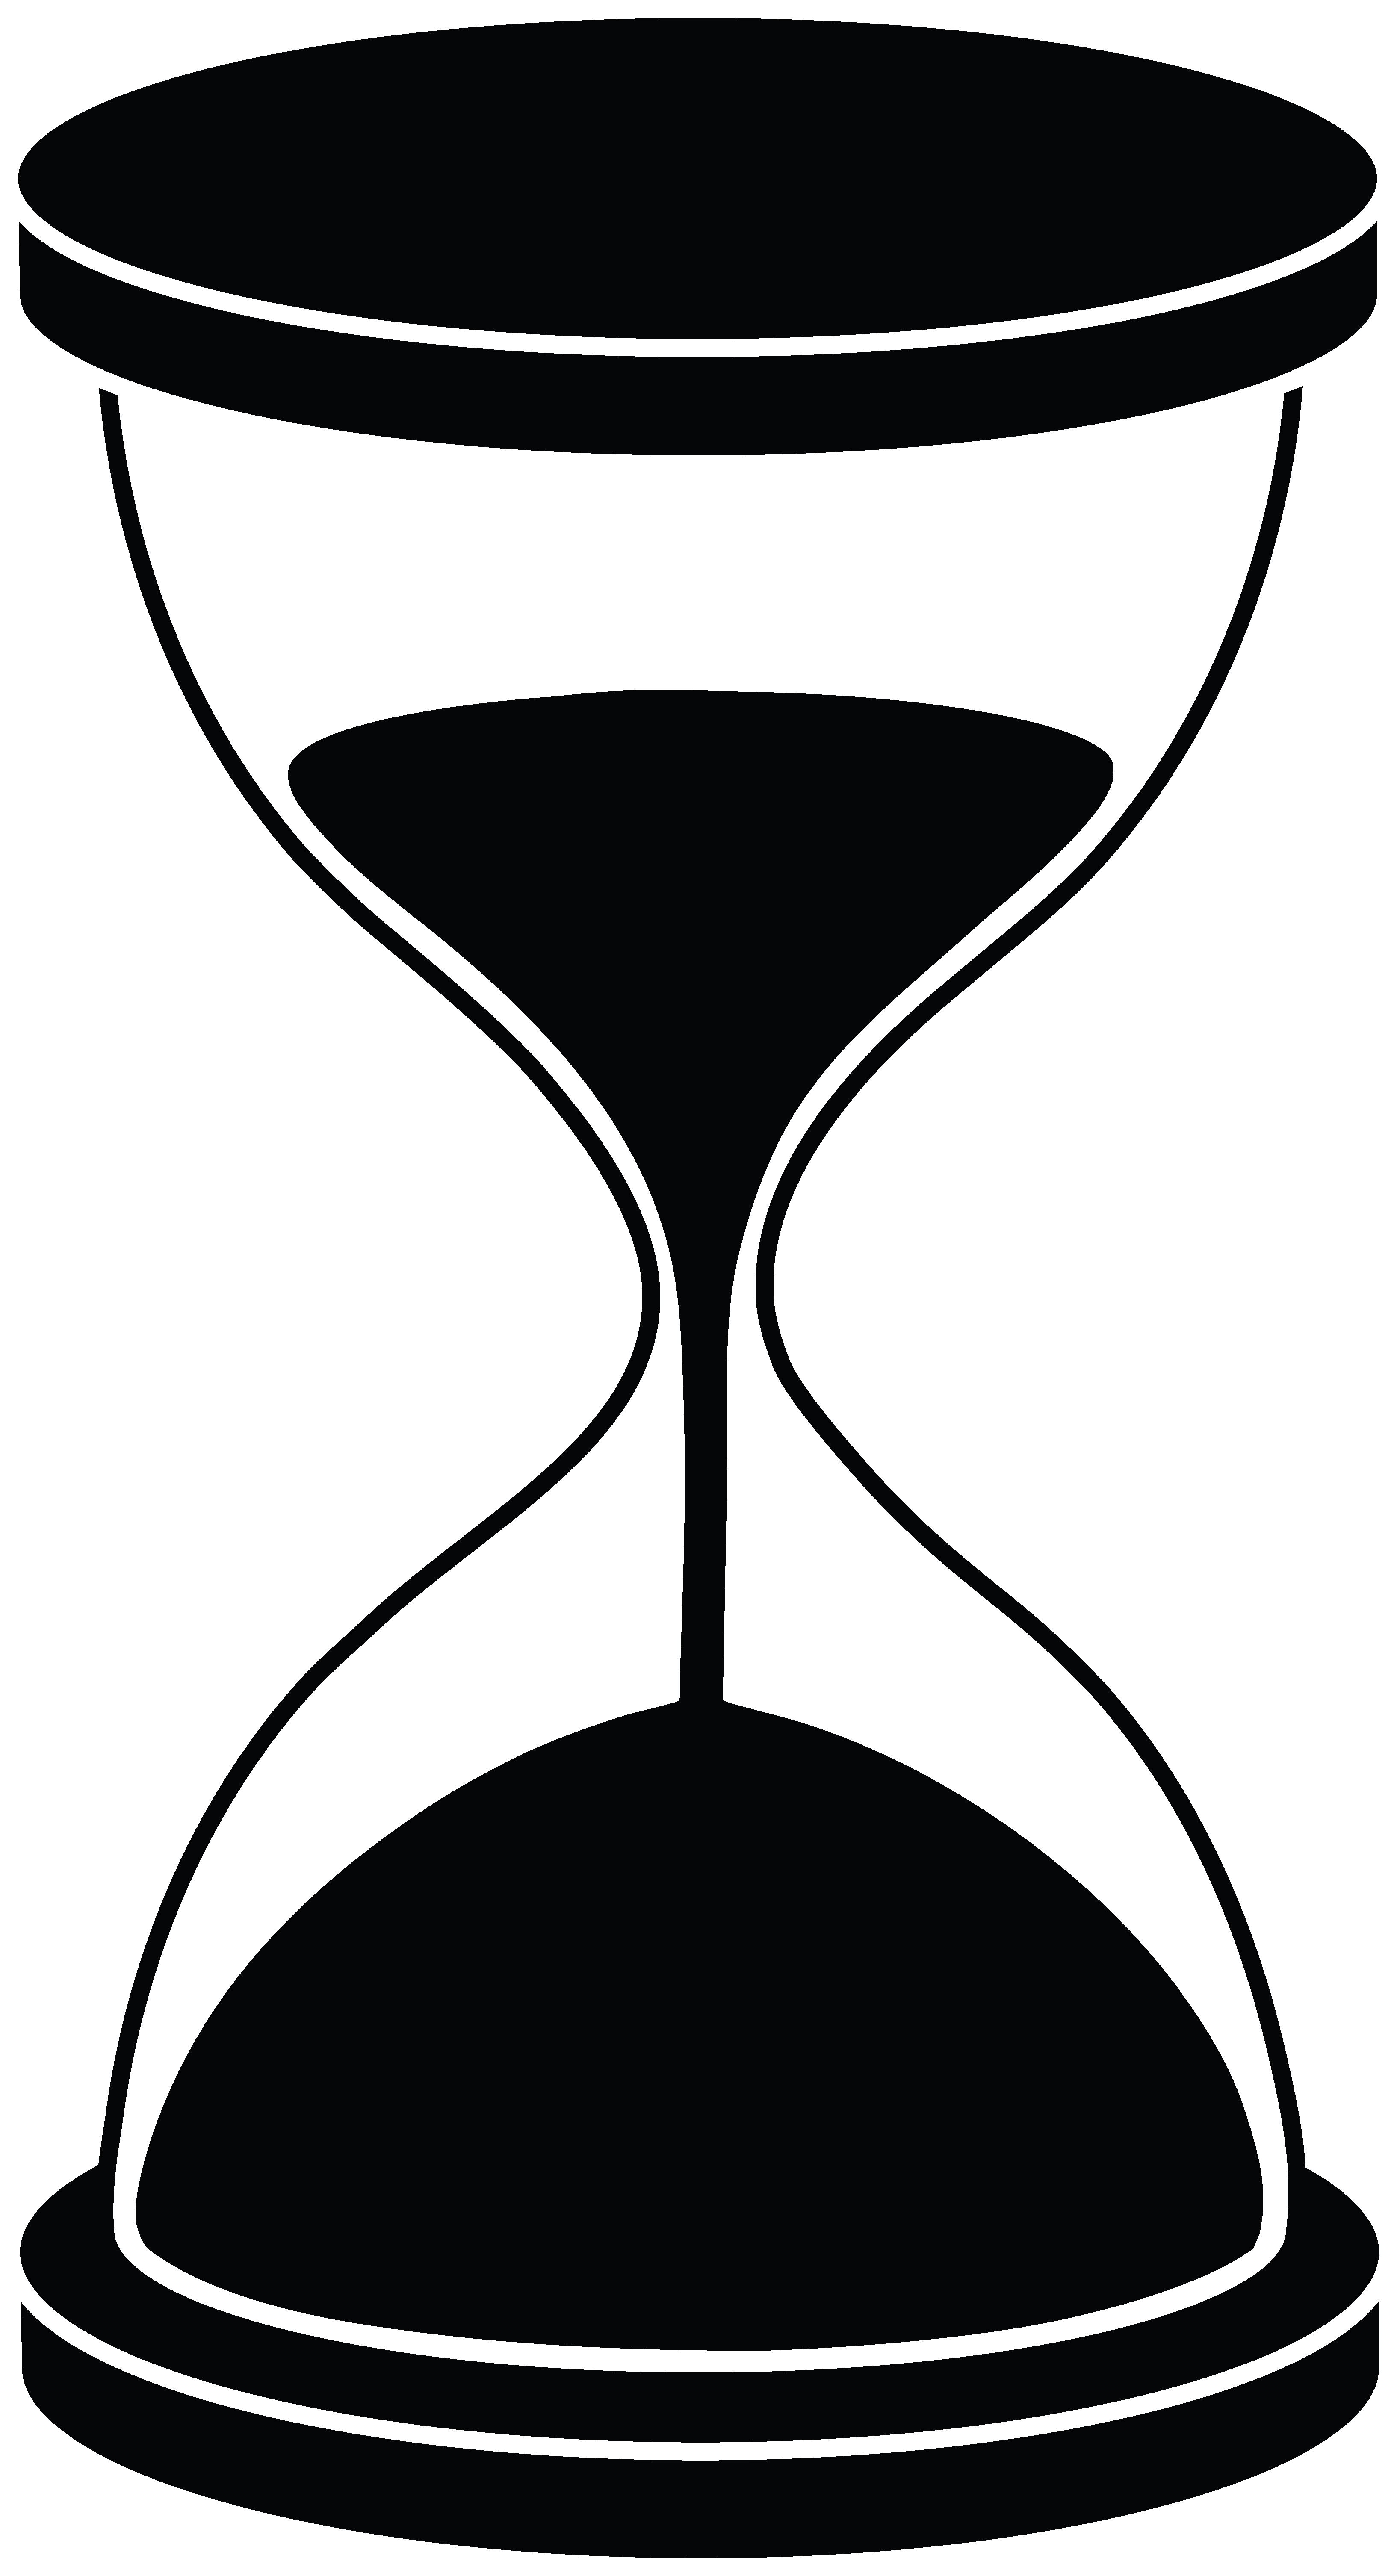 Free Hourglass Shape Cliparts, Download Free Clip Art, Free Clip Art on